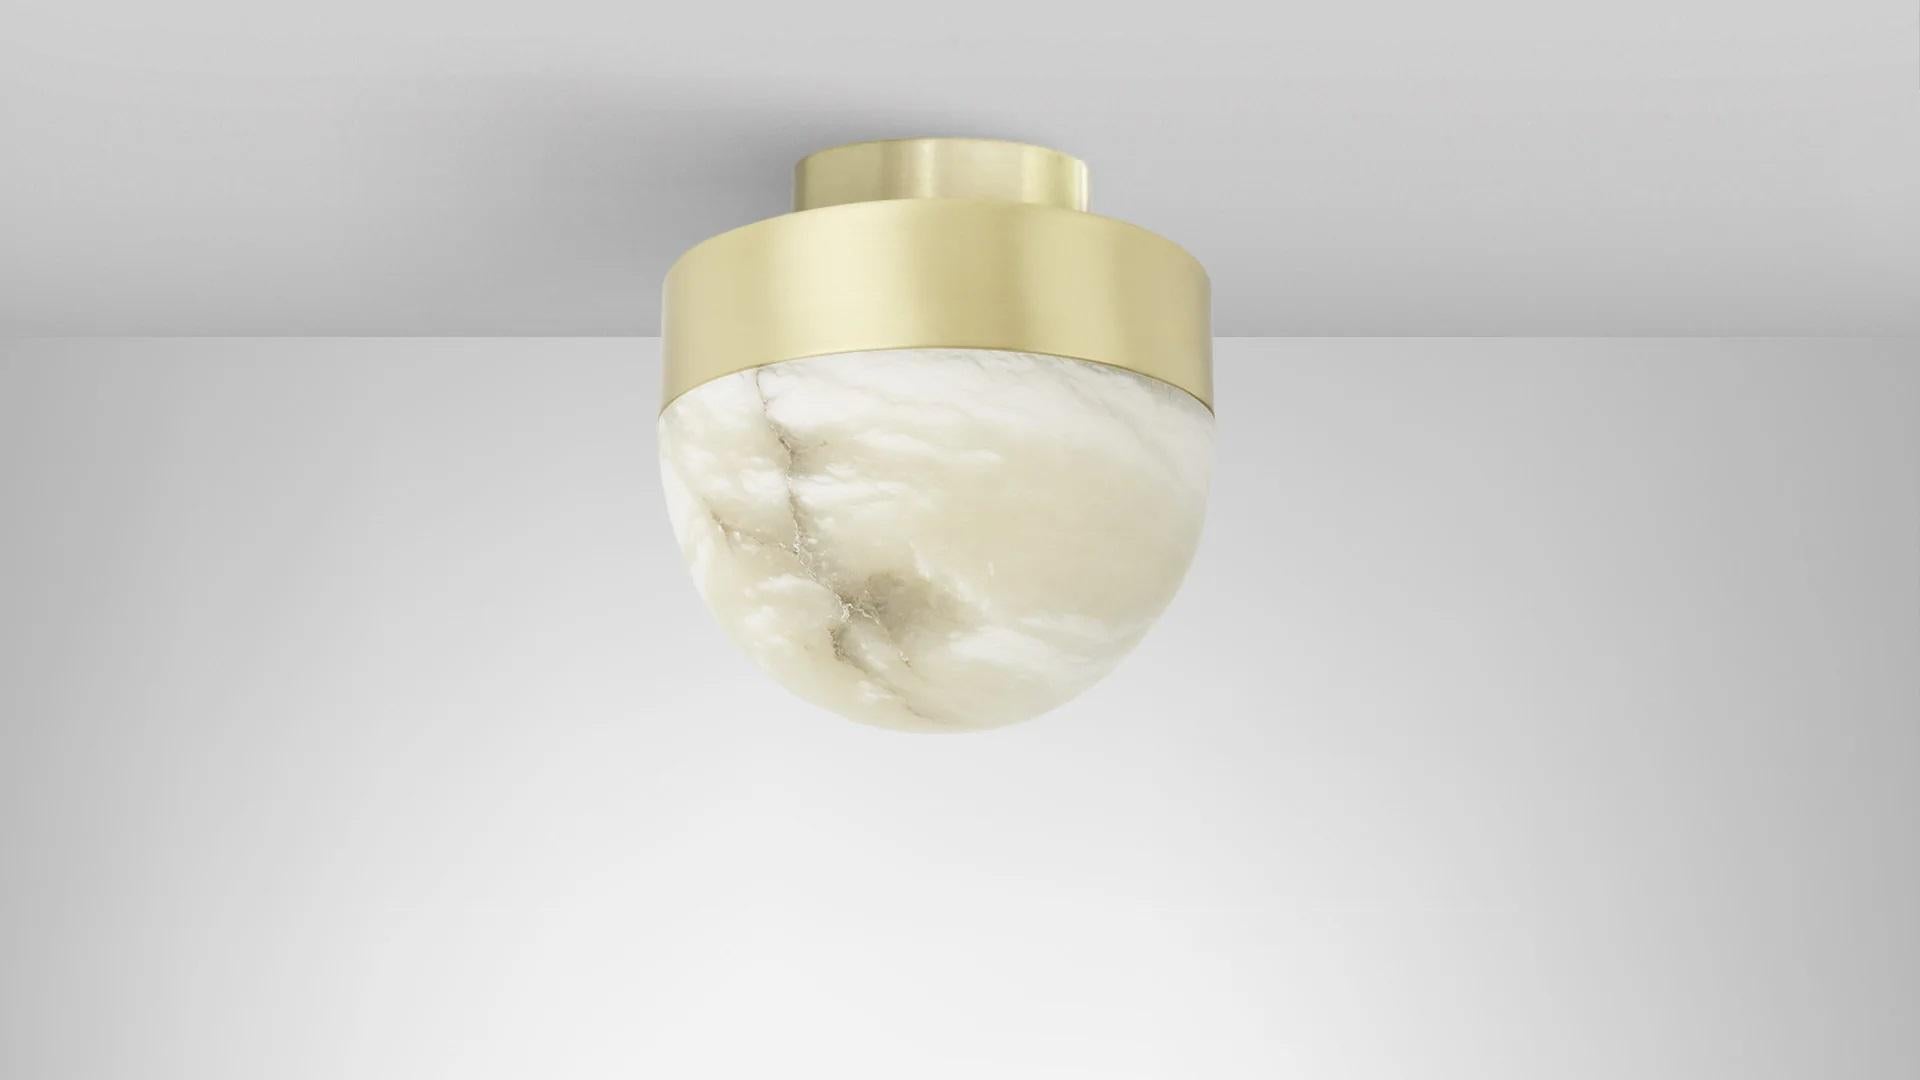 Lucid 200 flush lamp by CTO Lighting
Materials: honed alabaster with satin brass base.
Also available in honed alabaster with bronze base.
Dimensions: H 20 x W 20 cm

All our lamps can be wired according to each country. If sold to the USA it will